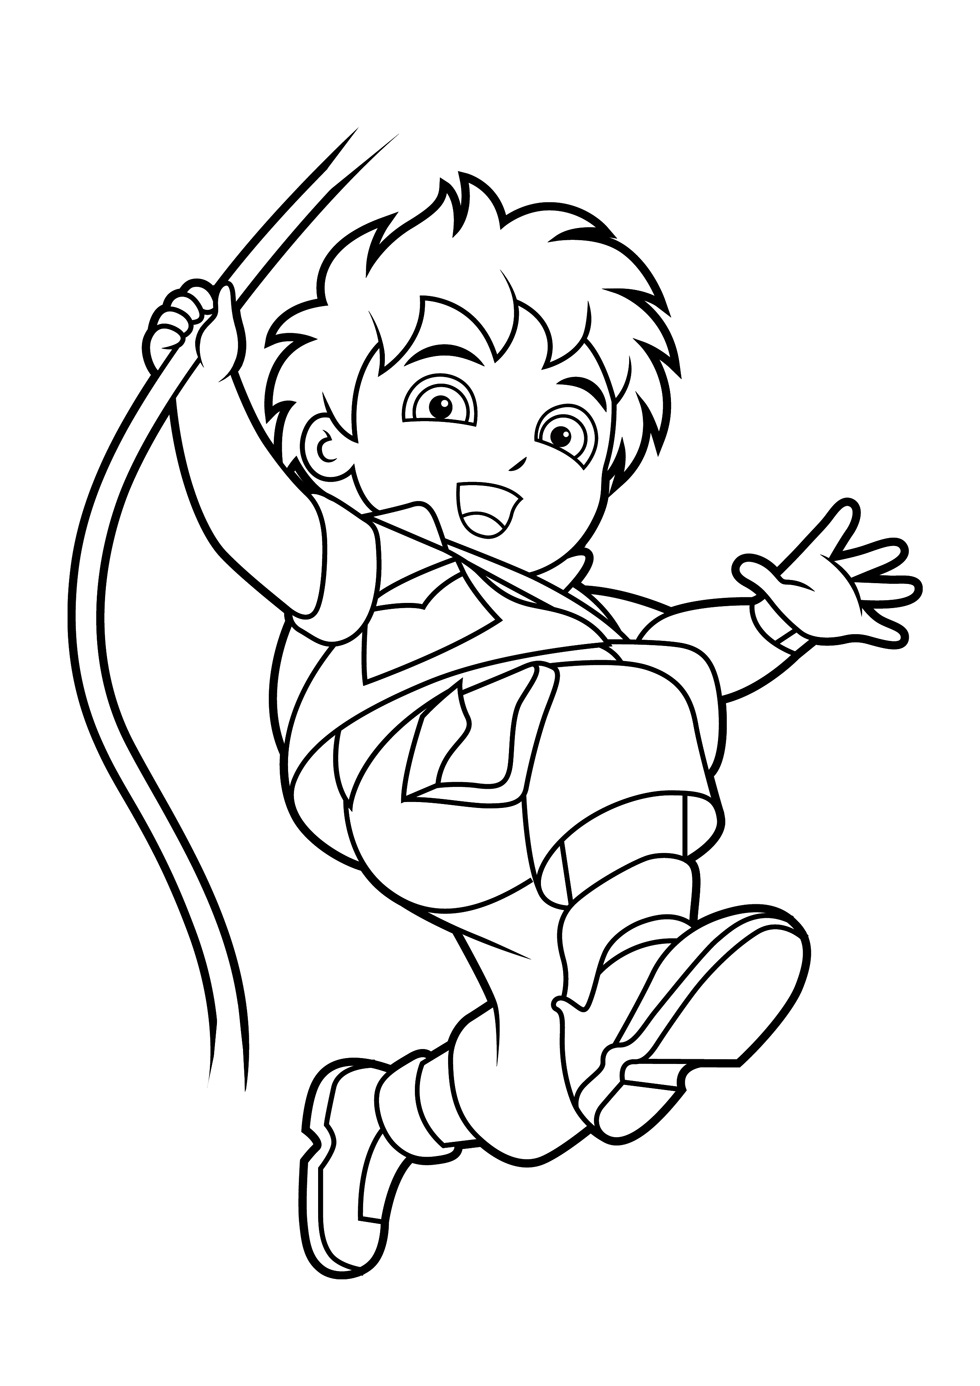 Cute Diego Coloring Page - Free Printable Coloring Pages for Kids